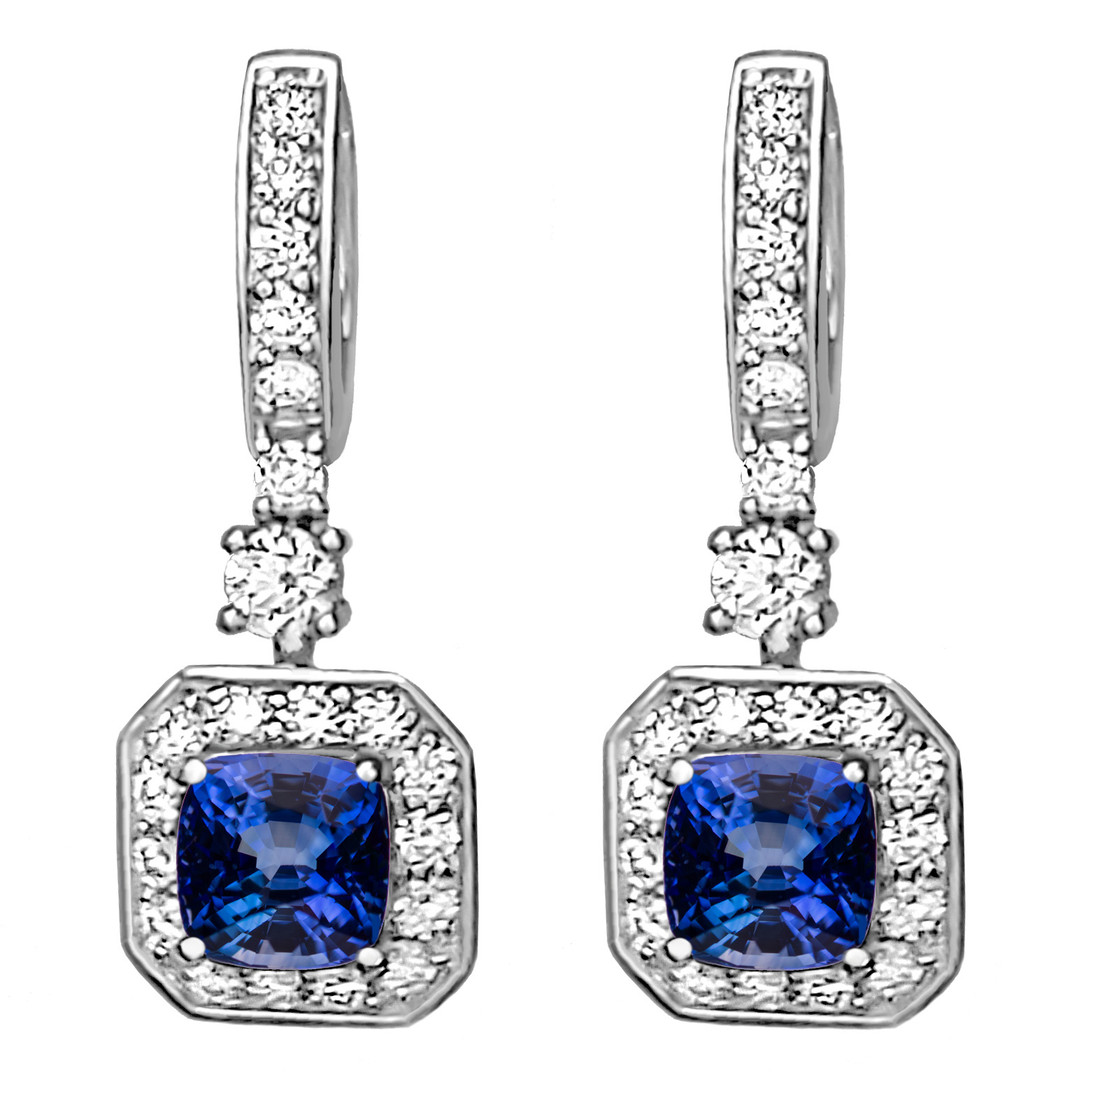 BLUE SAPPHIRE PAVE BAGUETTE DROP EARRINGS – SHAY JEWELRY